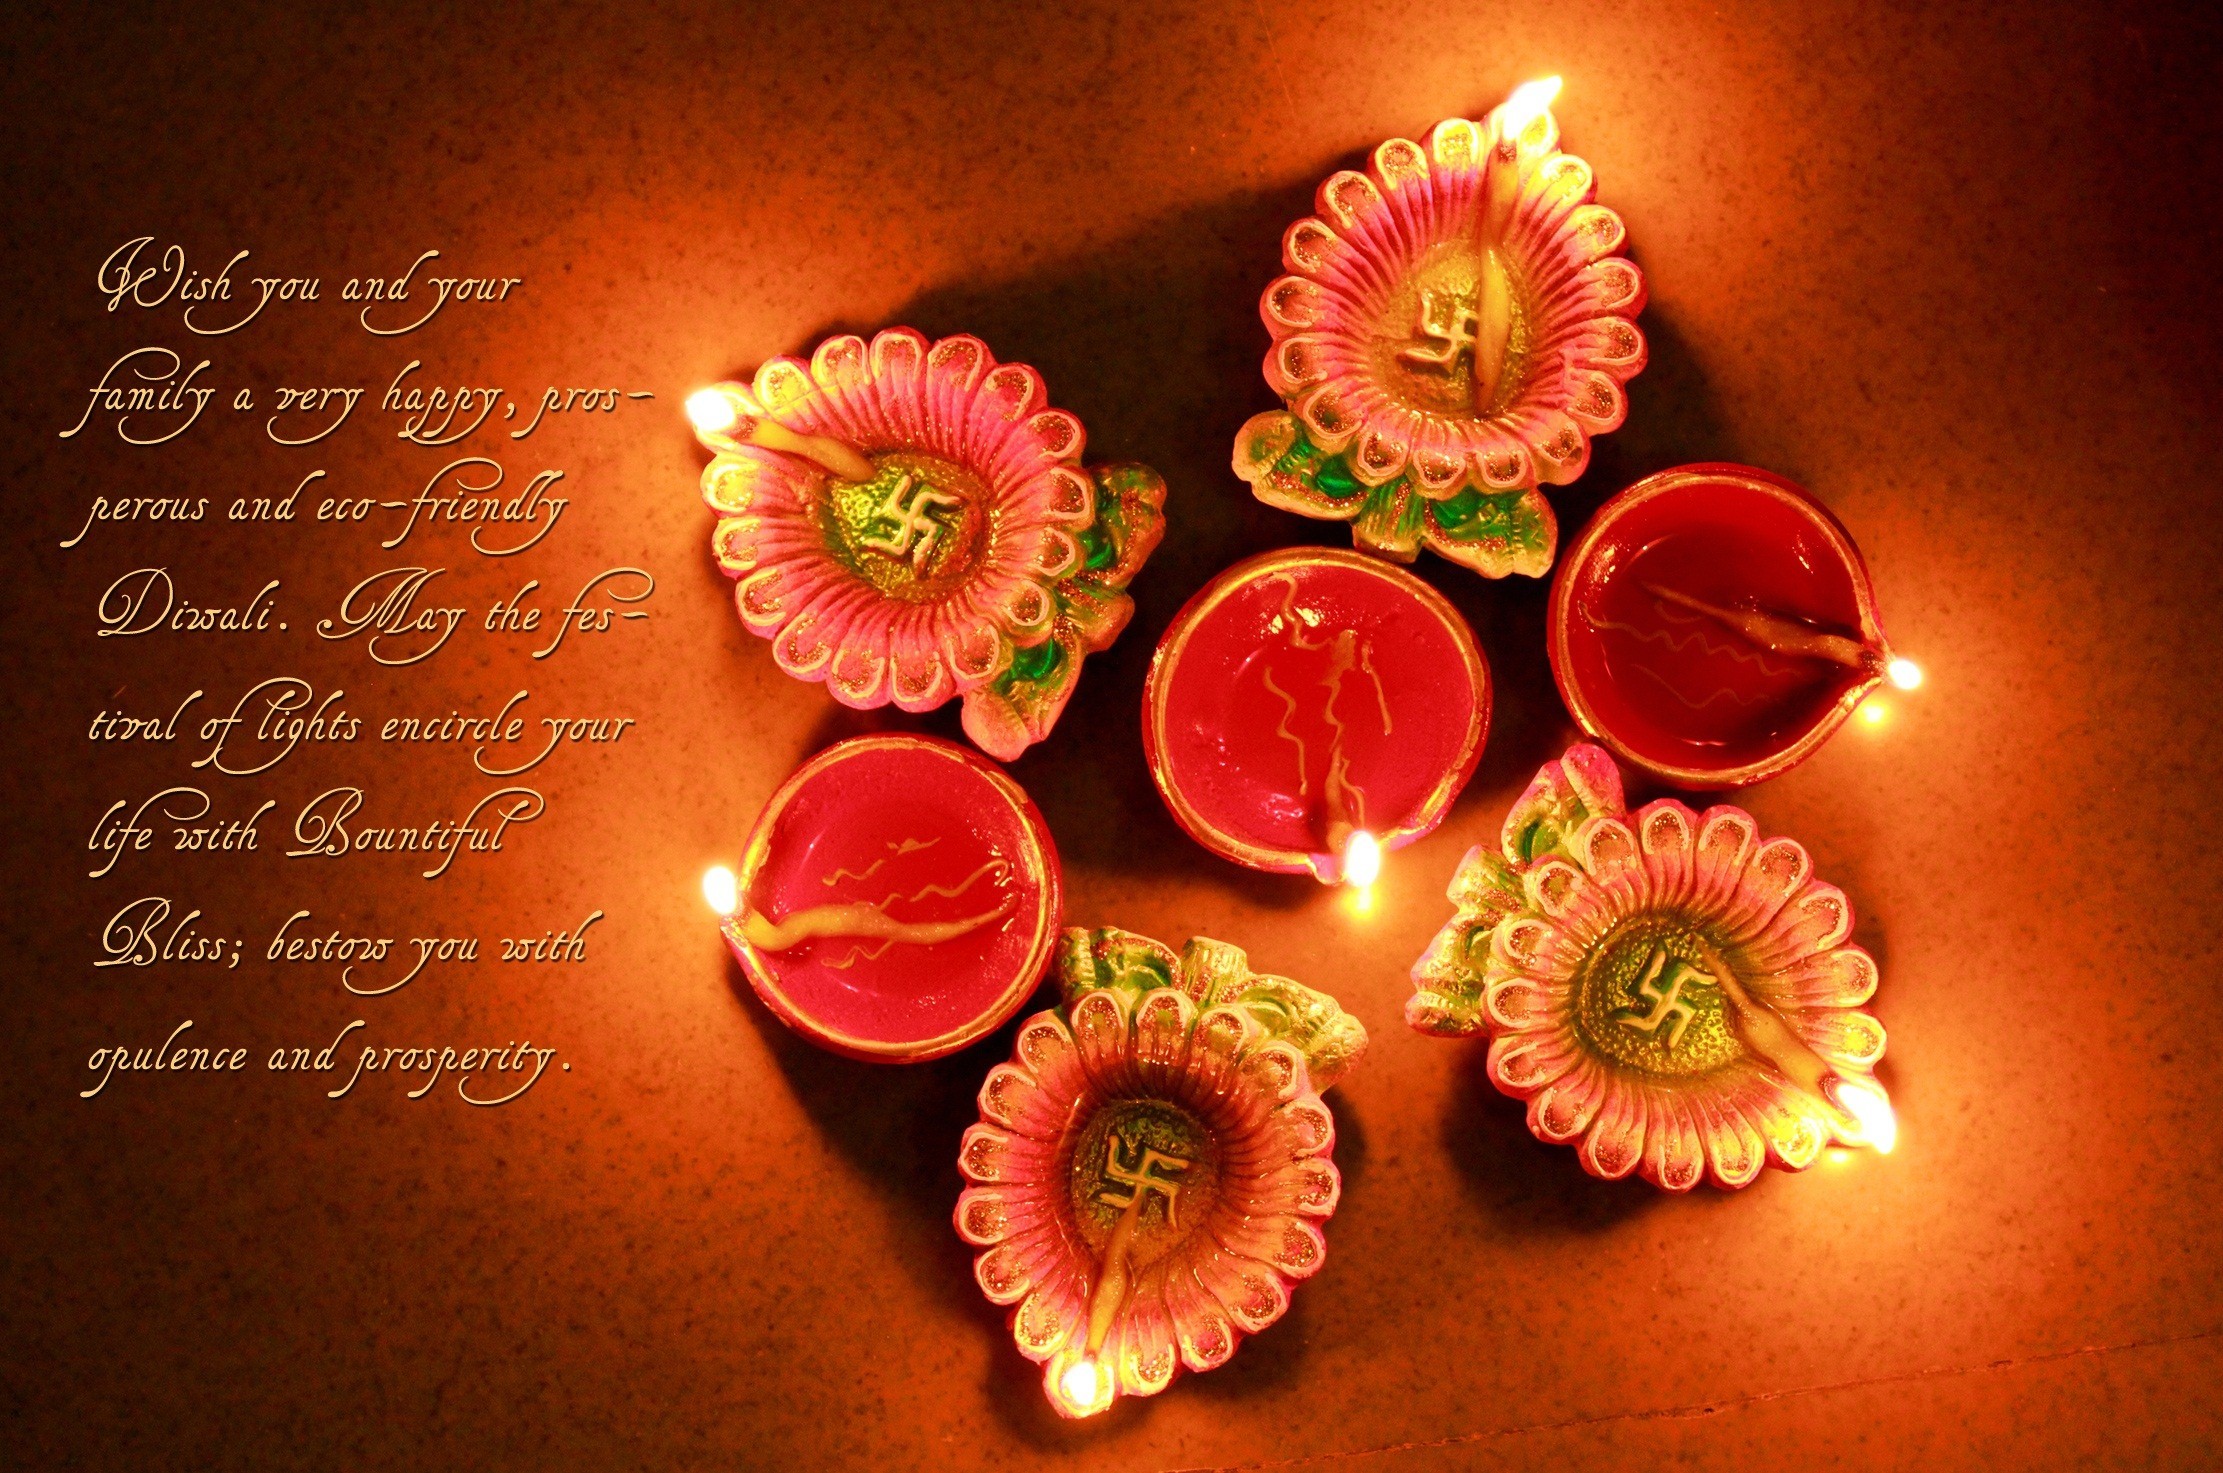 wish you and your family a very happy diwali